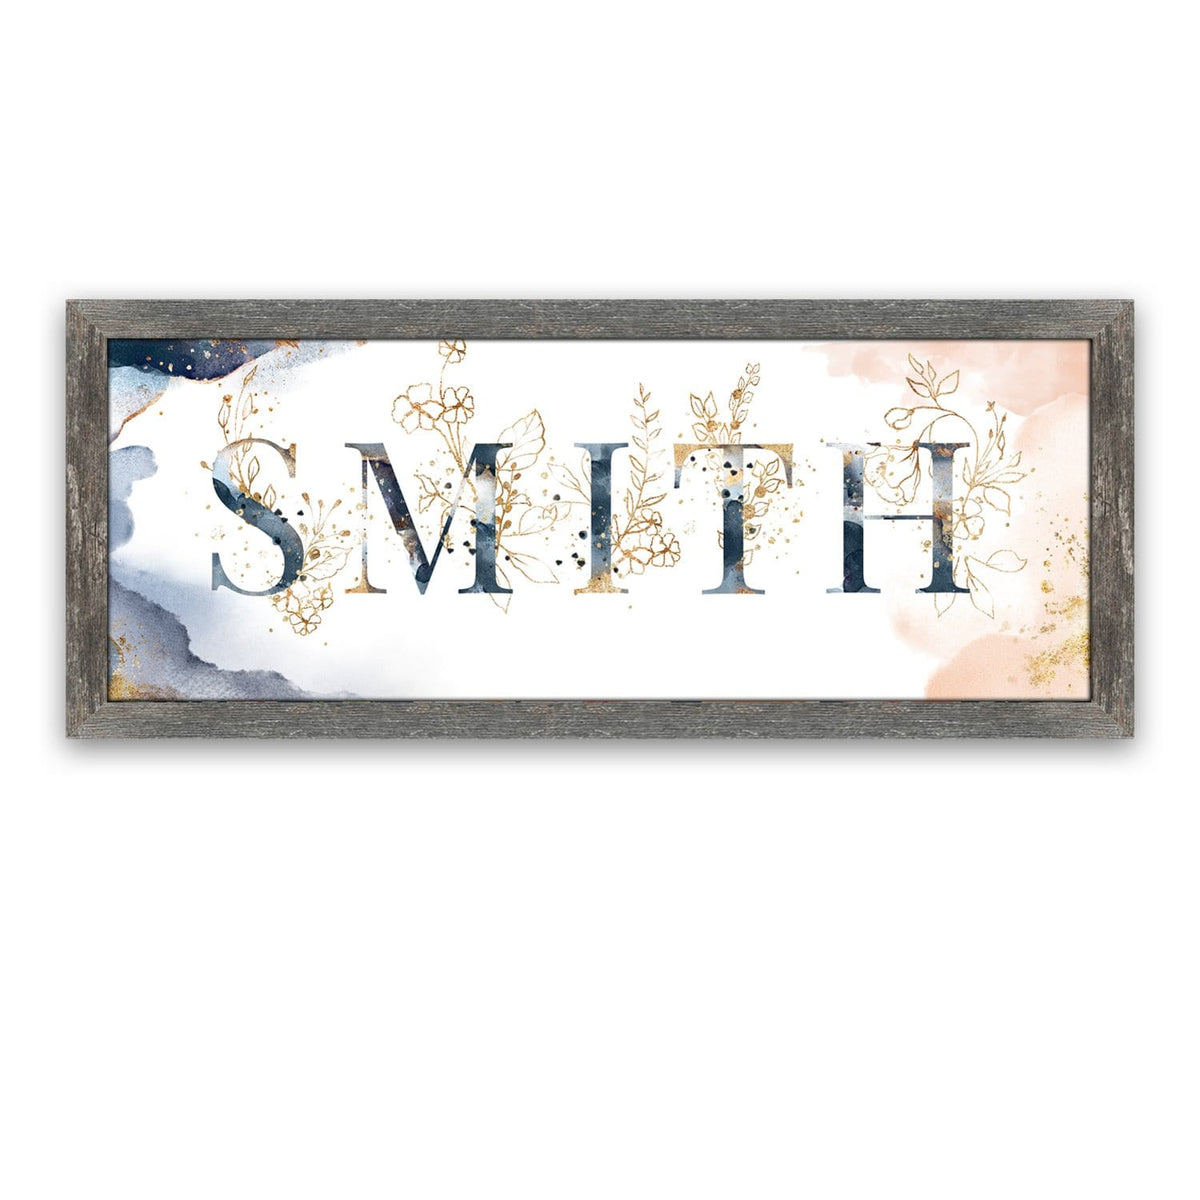 Framed Canvas Wall Art - Abstract floral personalized art from Personal Prints